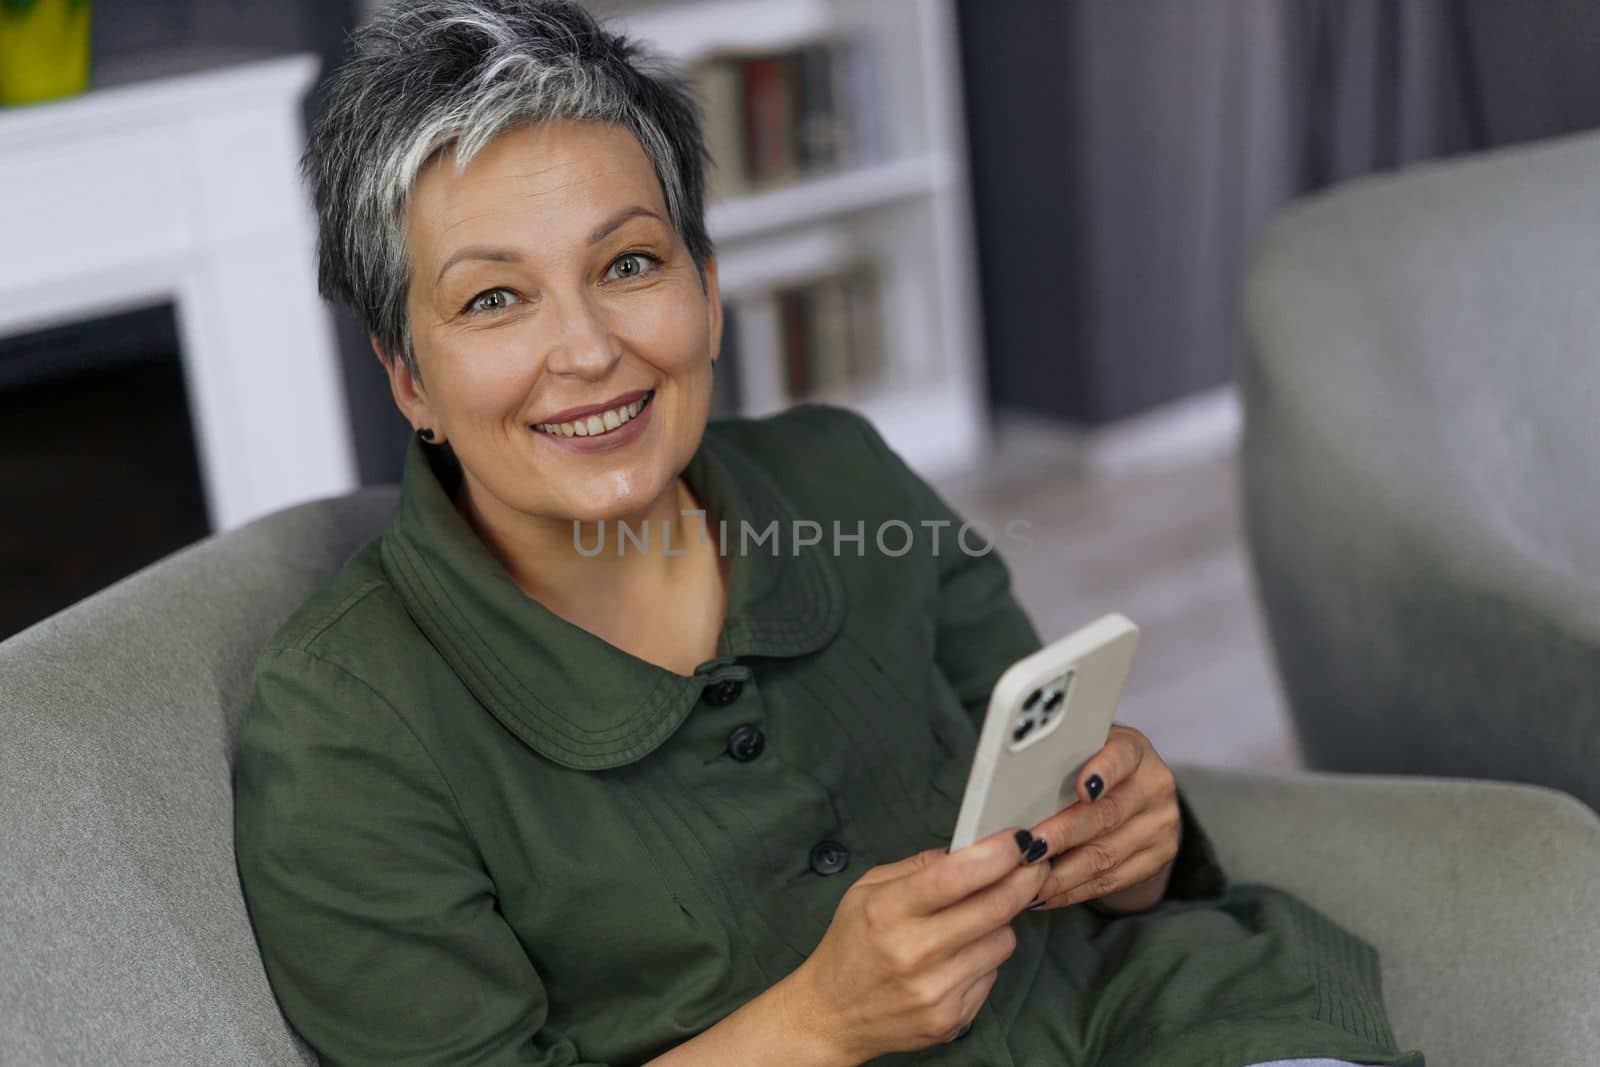 Happy woman is smiles brightly indoors. Surrounded by the warmth of her home, she exudes sense of contentment and peace. Her smile is contagious, spreading positivity. High quality photo.